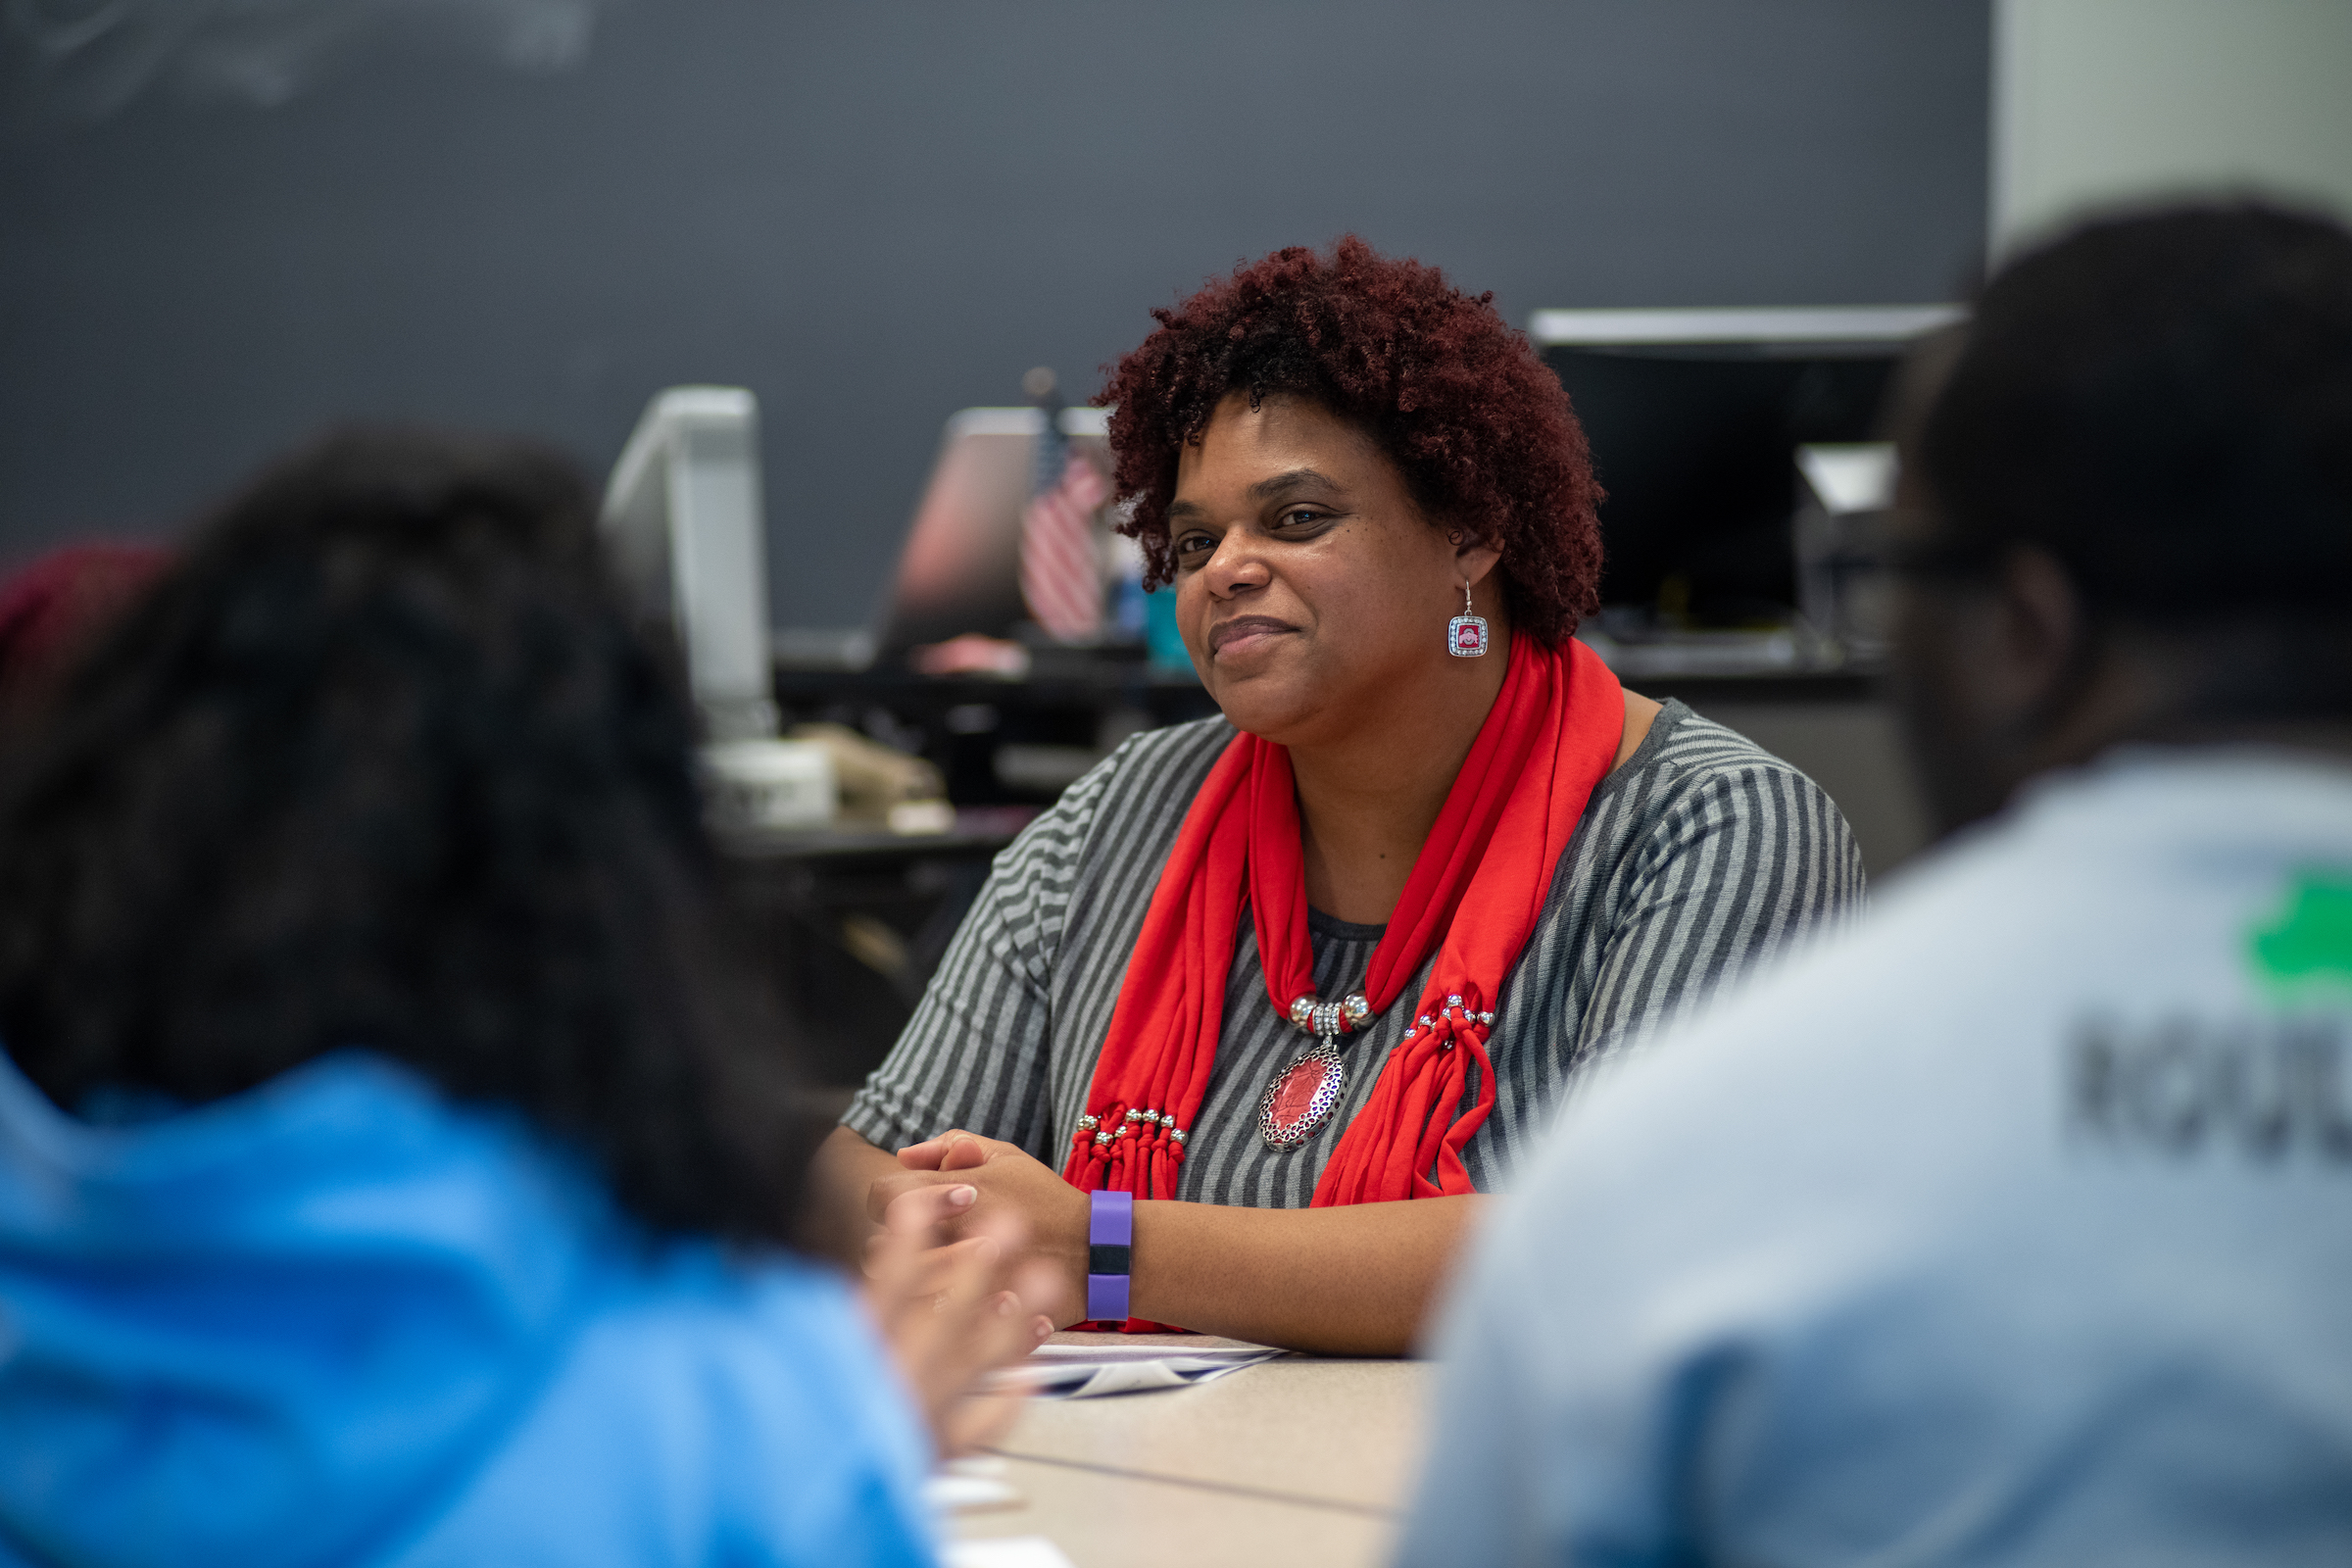 A professor sits in focus in front of two students in the foreground out of focus. The Faculty member is wearing a black and white blouse with a red scarf.